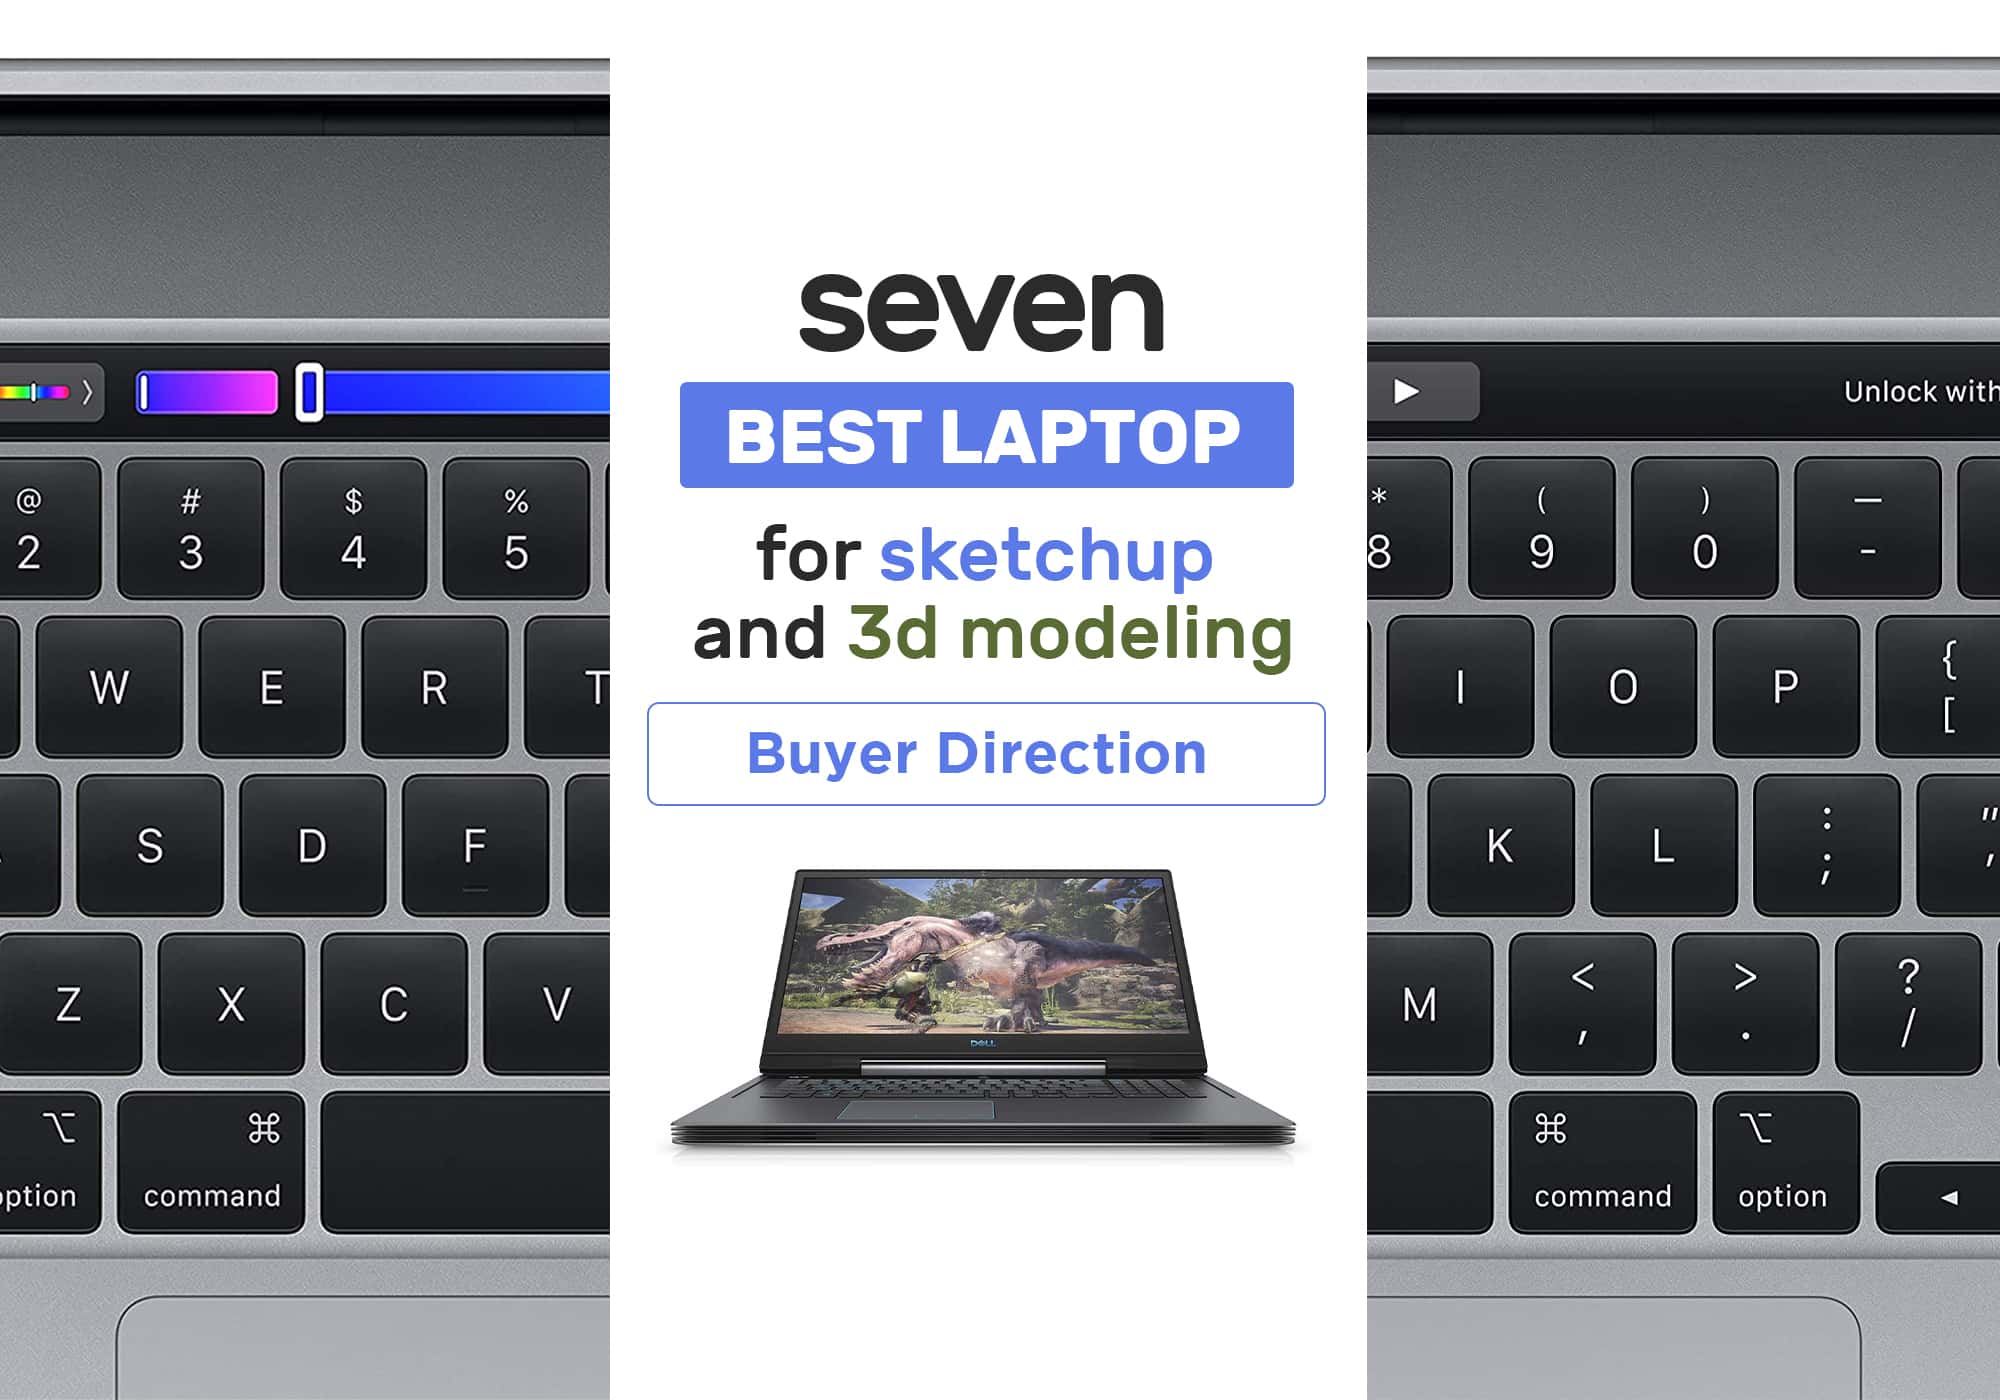 7 Best laptop for SketchUp and 3D Modeling